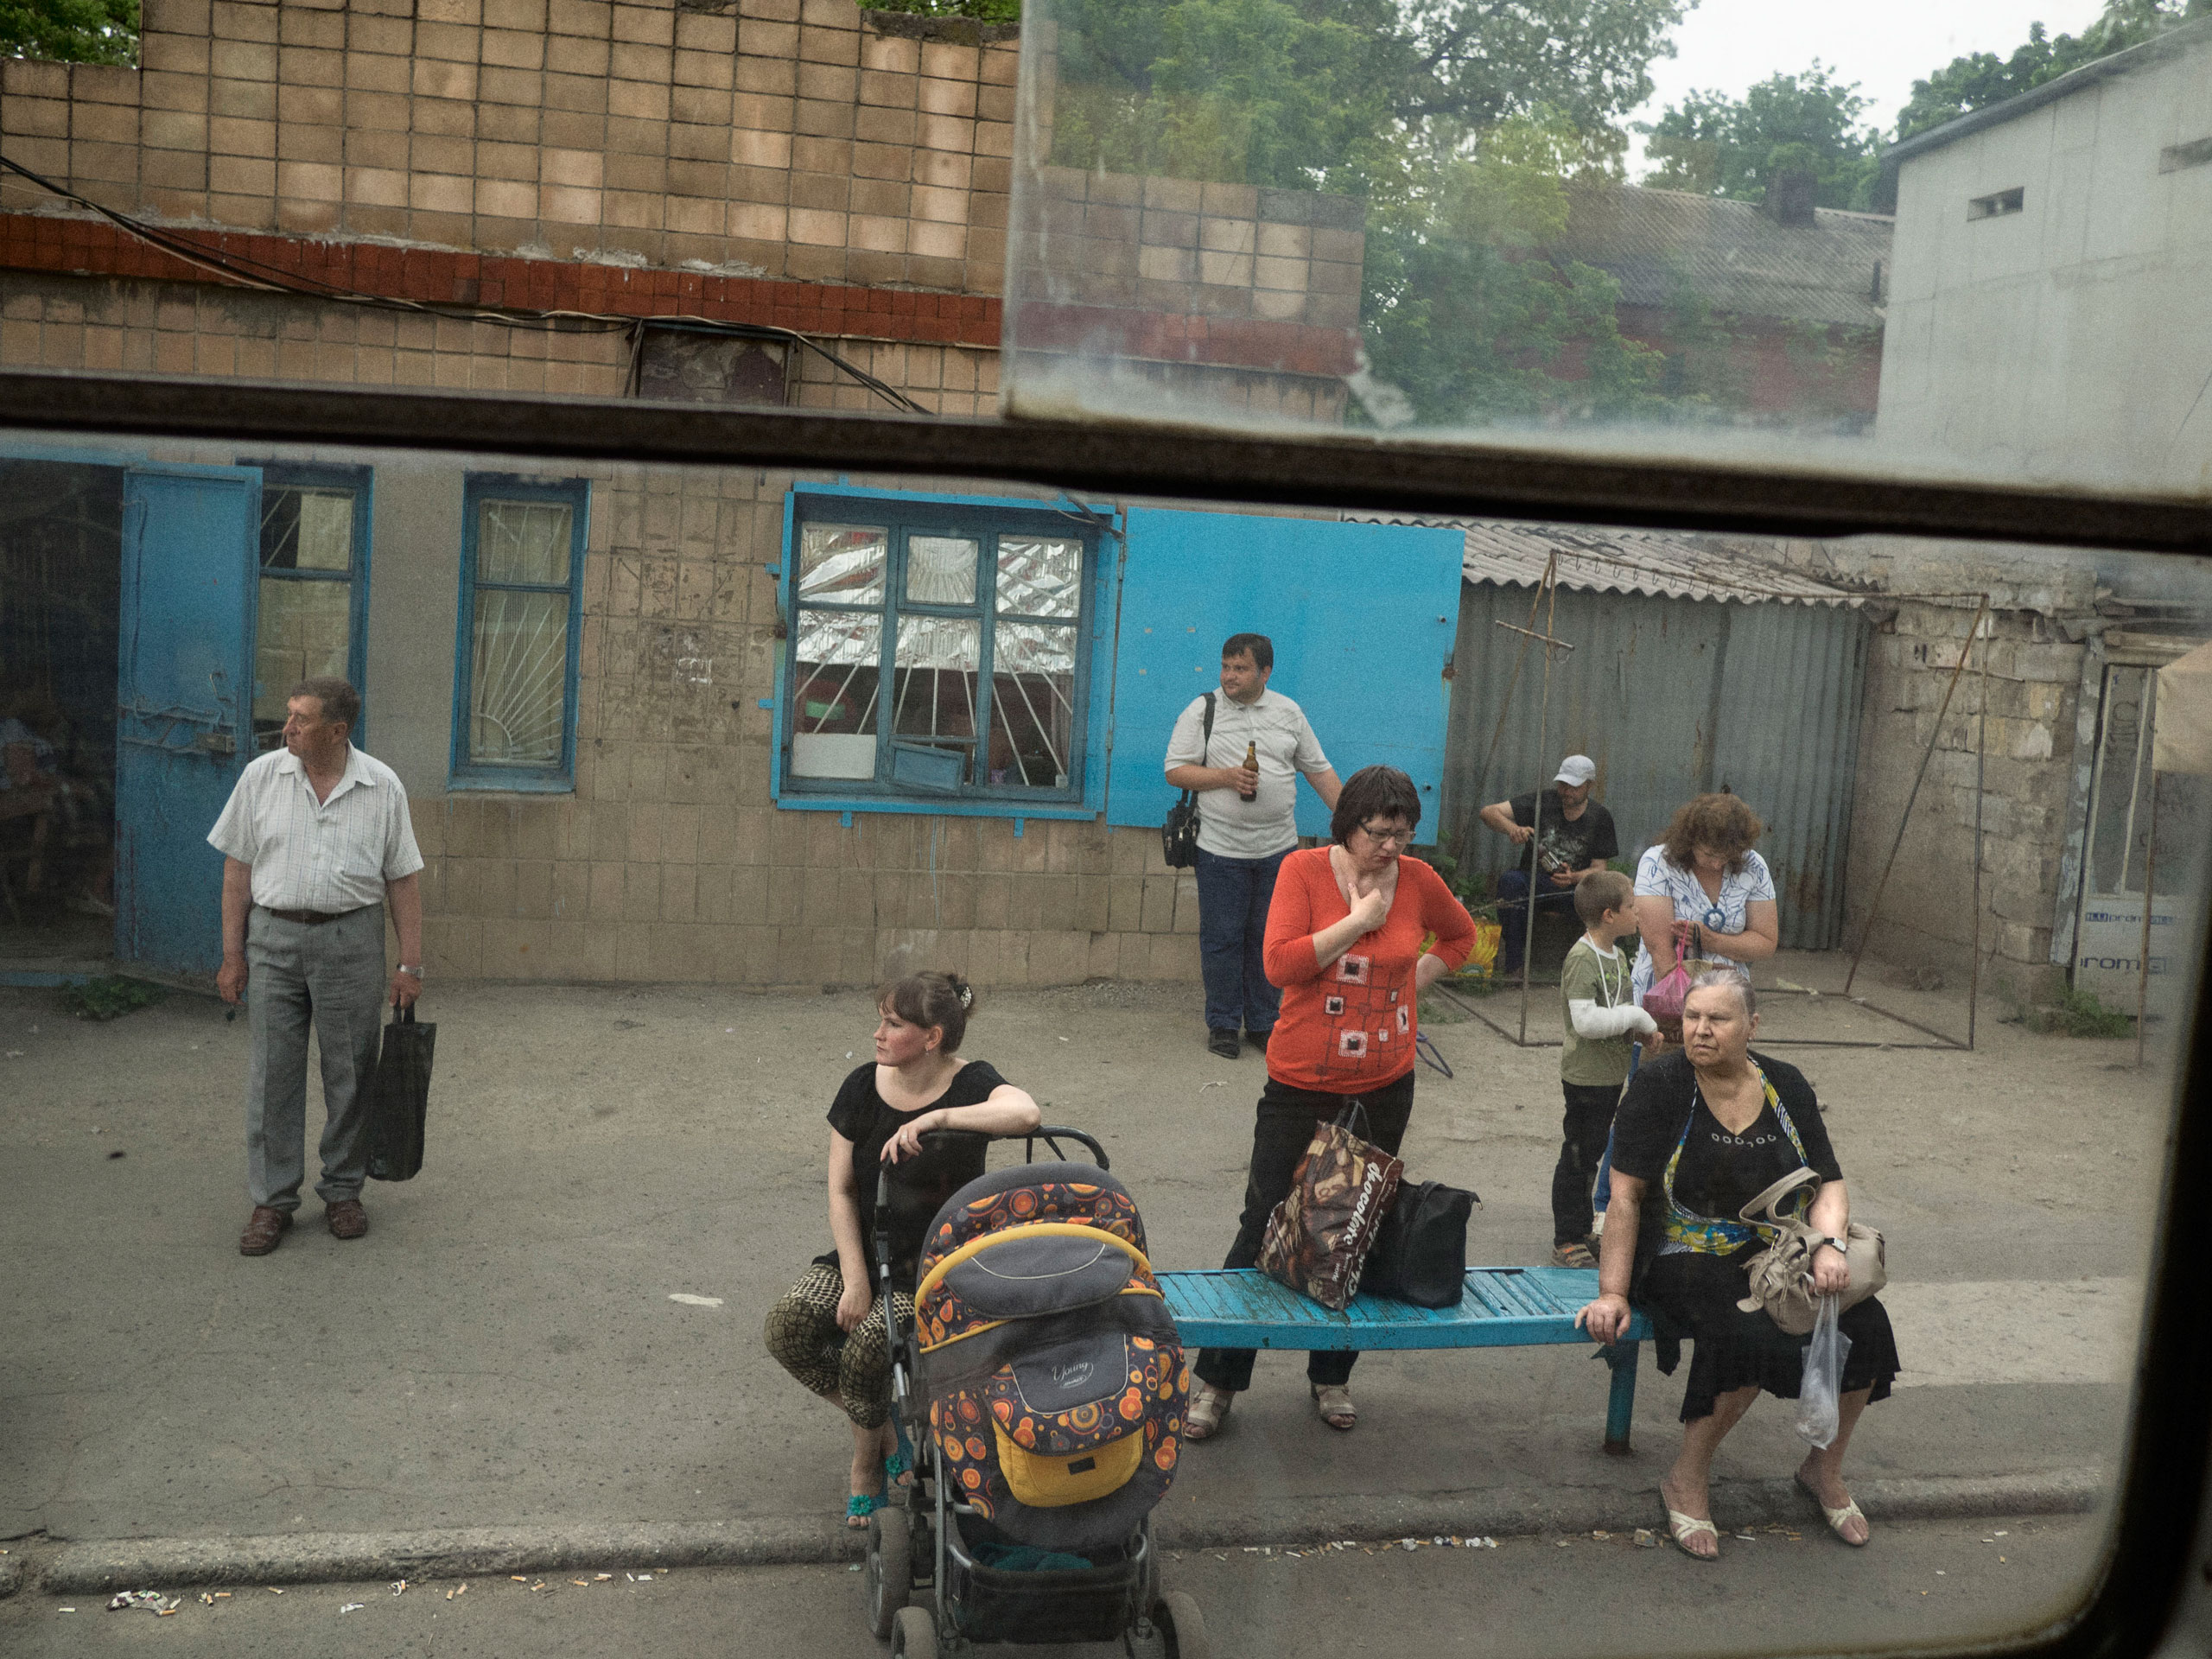 A view of people waiting at the main station of the tramway in the downtown area, as seen through a window on the tramway. Mariupol, Ukraine. May 28, 2015.